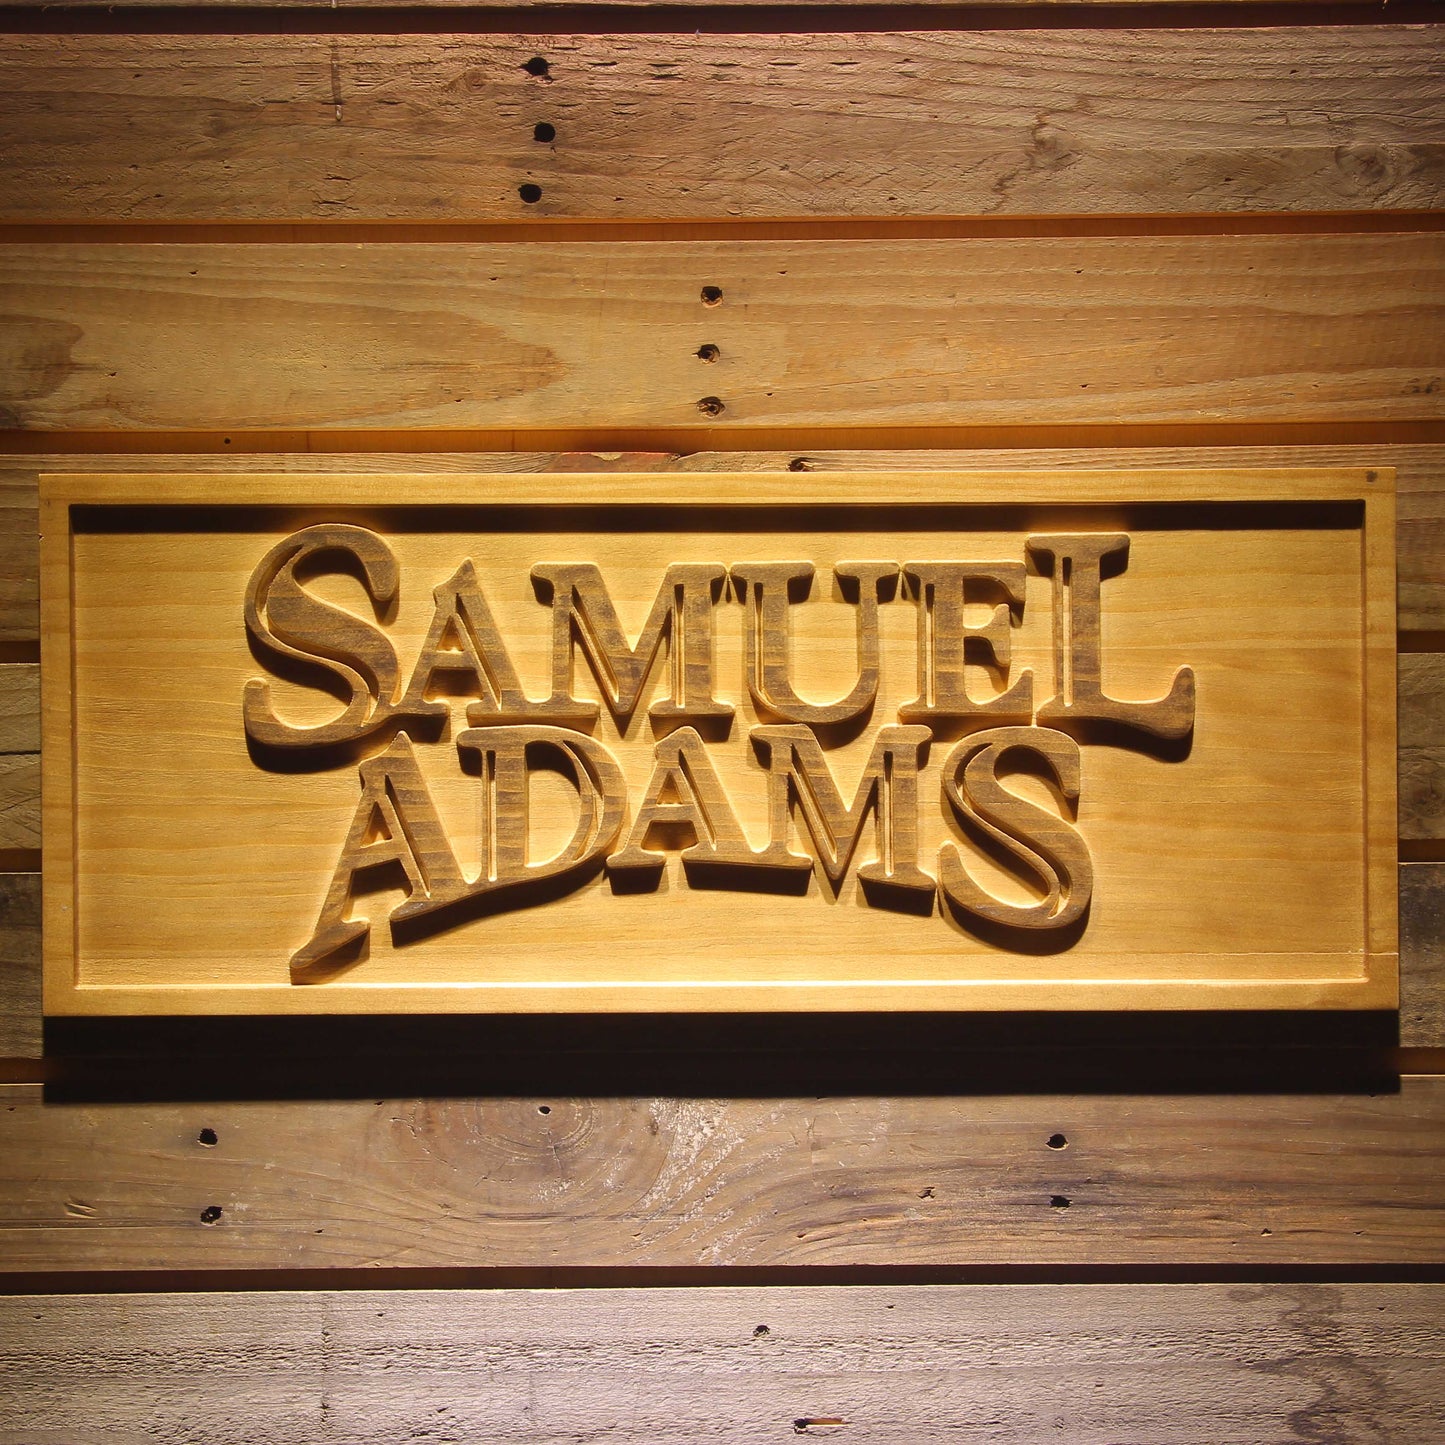 Samuel Adams 3D Wooden Bar Signs by Woody Signs Co. - Handmade Crafted Unique Wooden Creative